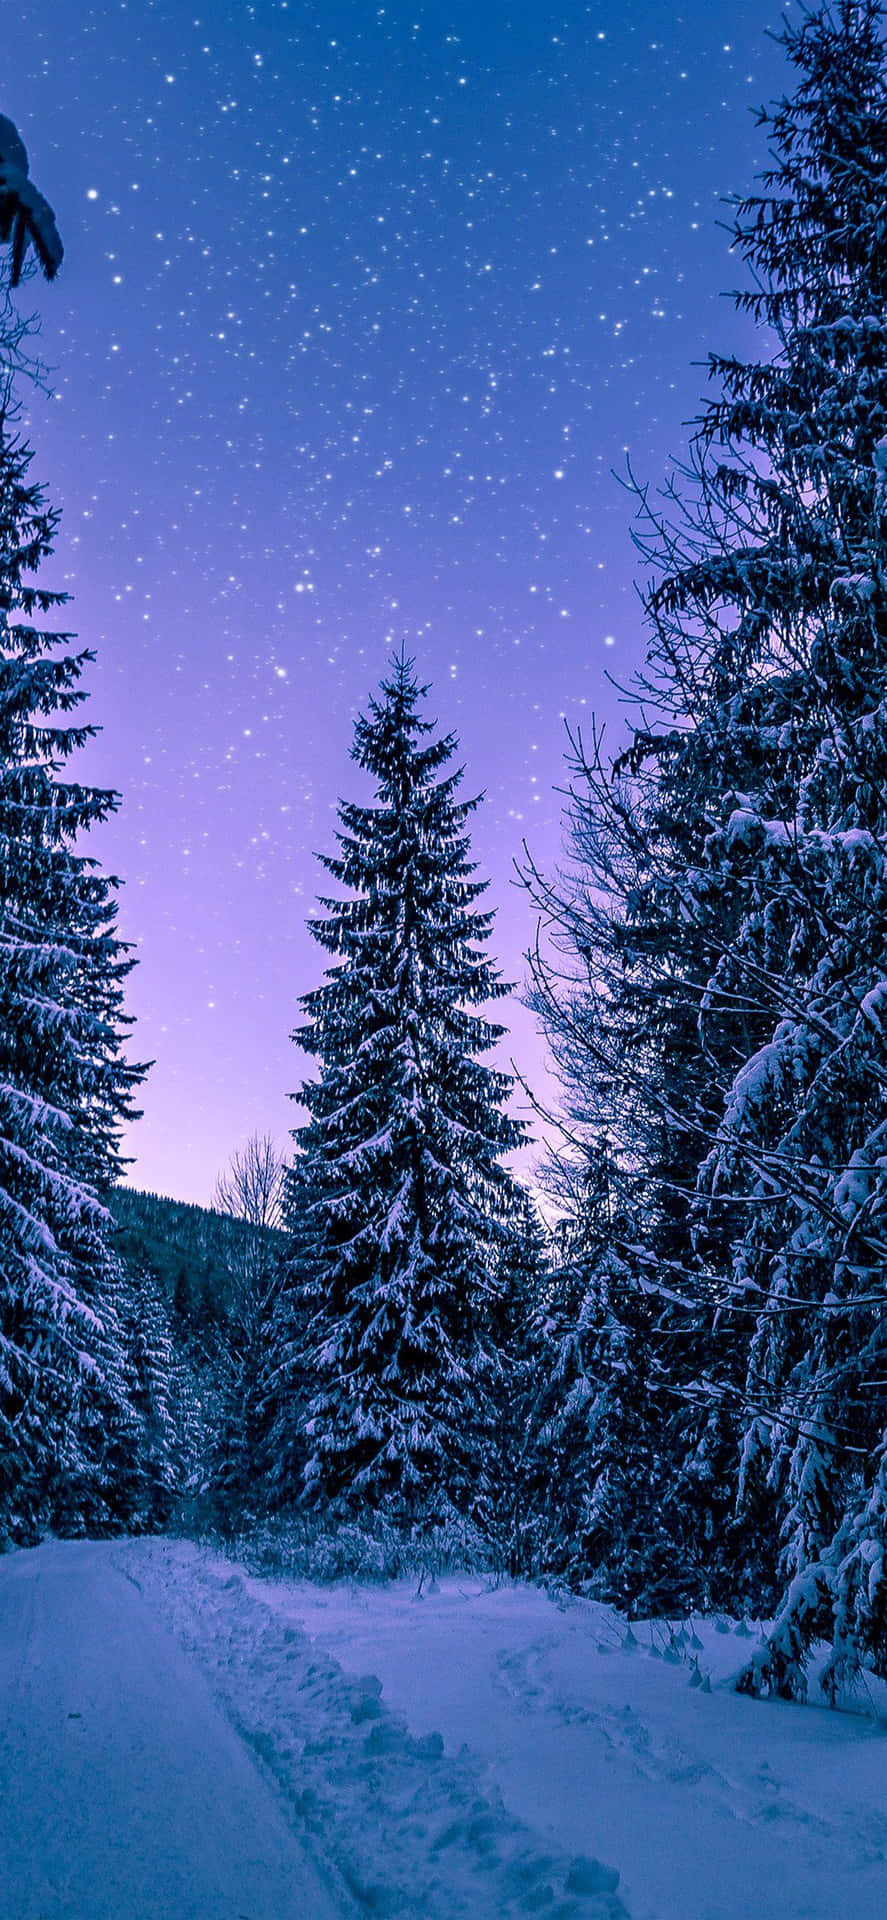 "Take in the Beauty of Nature this Winter" Wallpaper